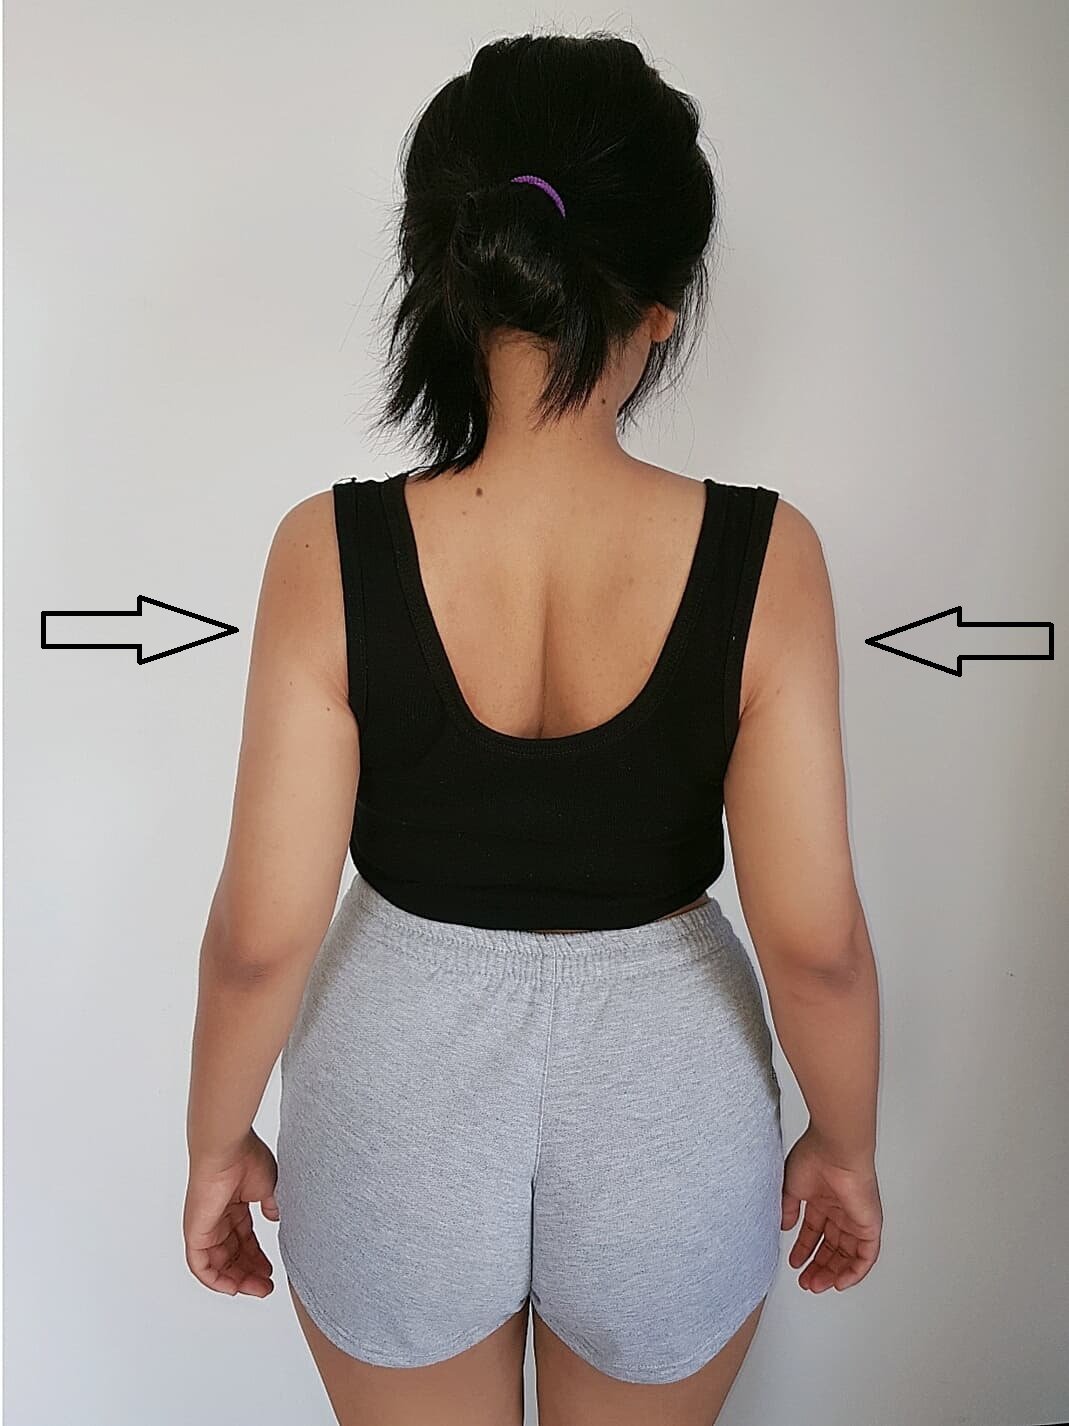 shoulder blade squeeze for a straight posture spine stand taller